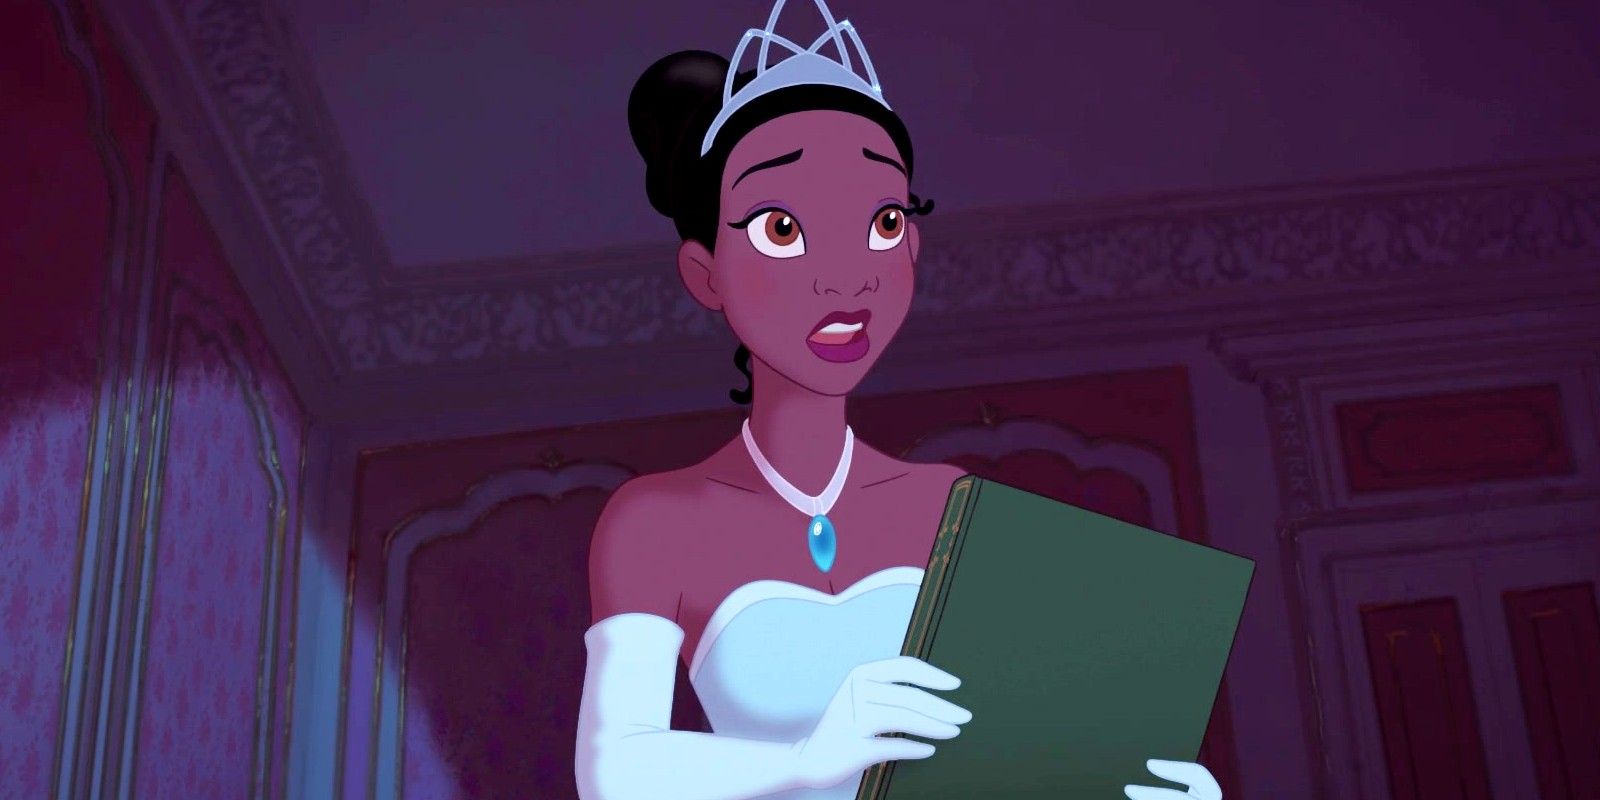 Tiana holding a book in The Princess and the Frog